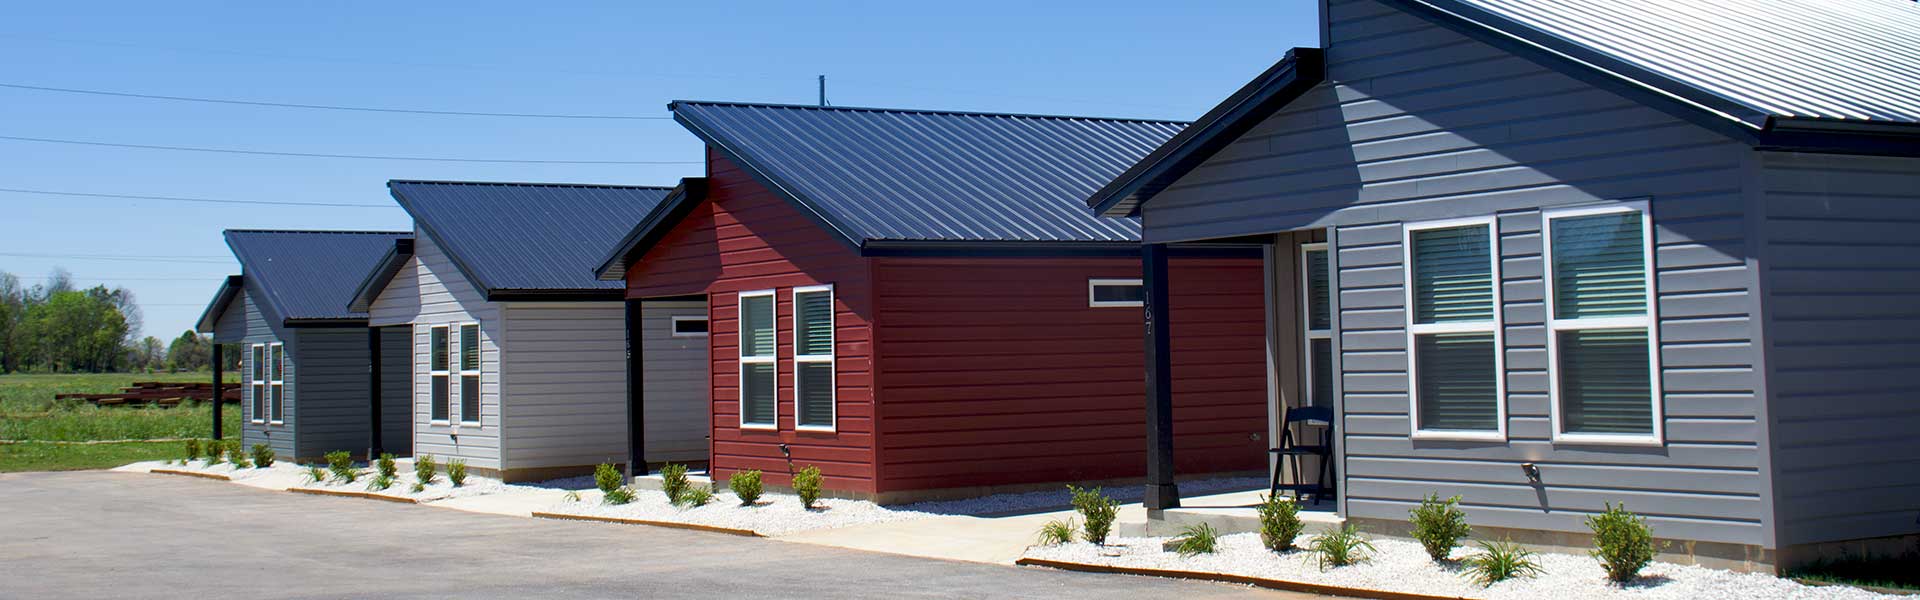 Copper Oaks, a modern, tiny home community located in Centerton, the heart of Northwest Arkansas.